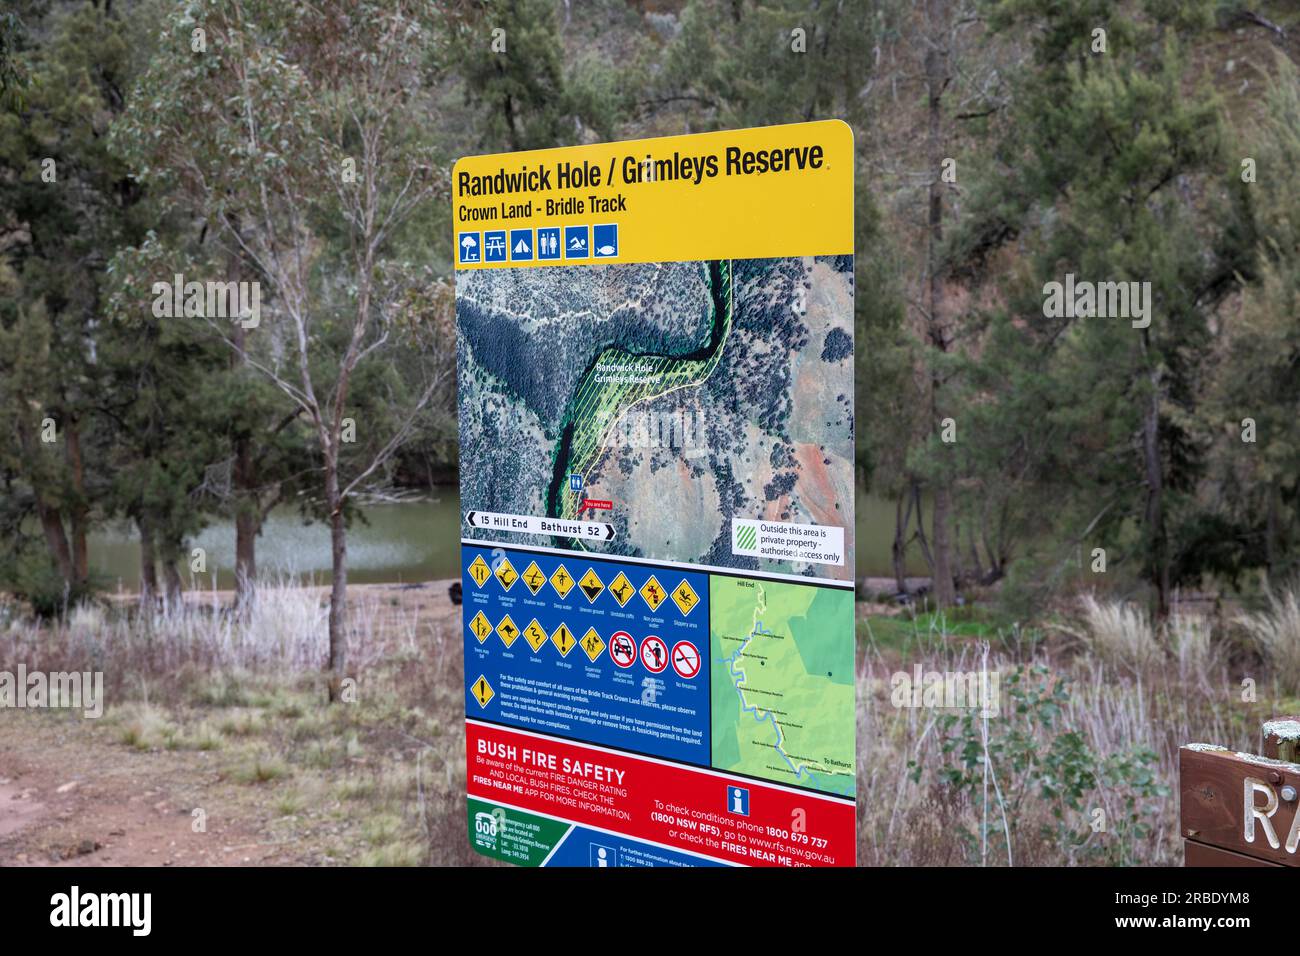 Hill End bridle track and Randwick hole and Grimley's reserve camp site beside Macquarie river, NSW,Australia Stock Photo